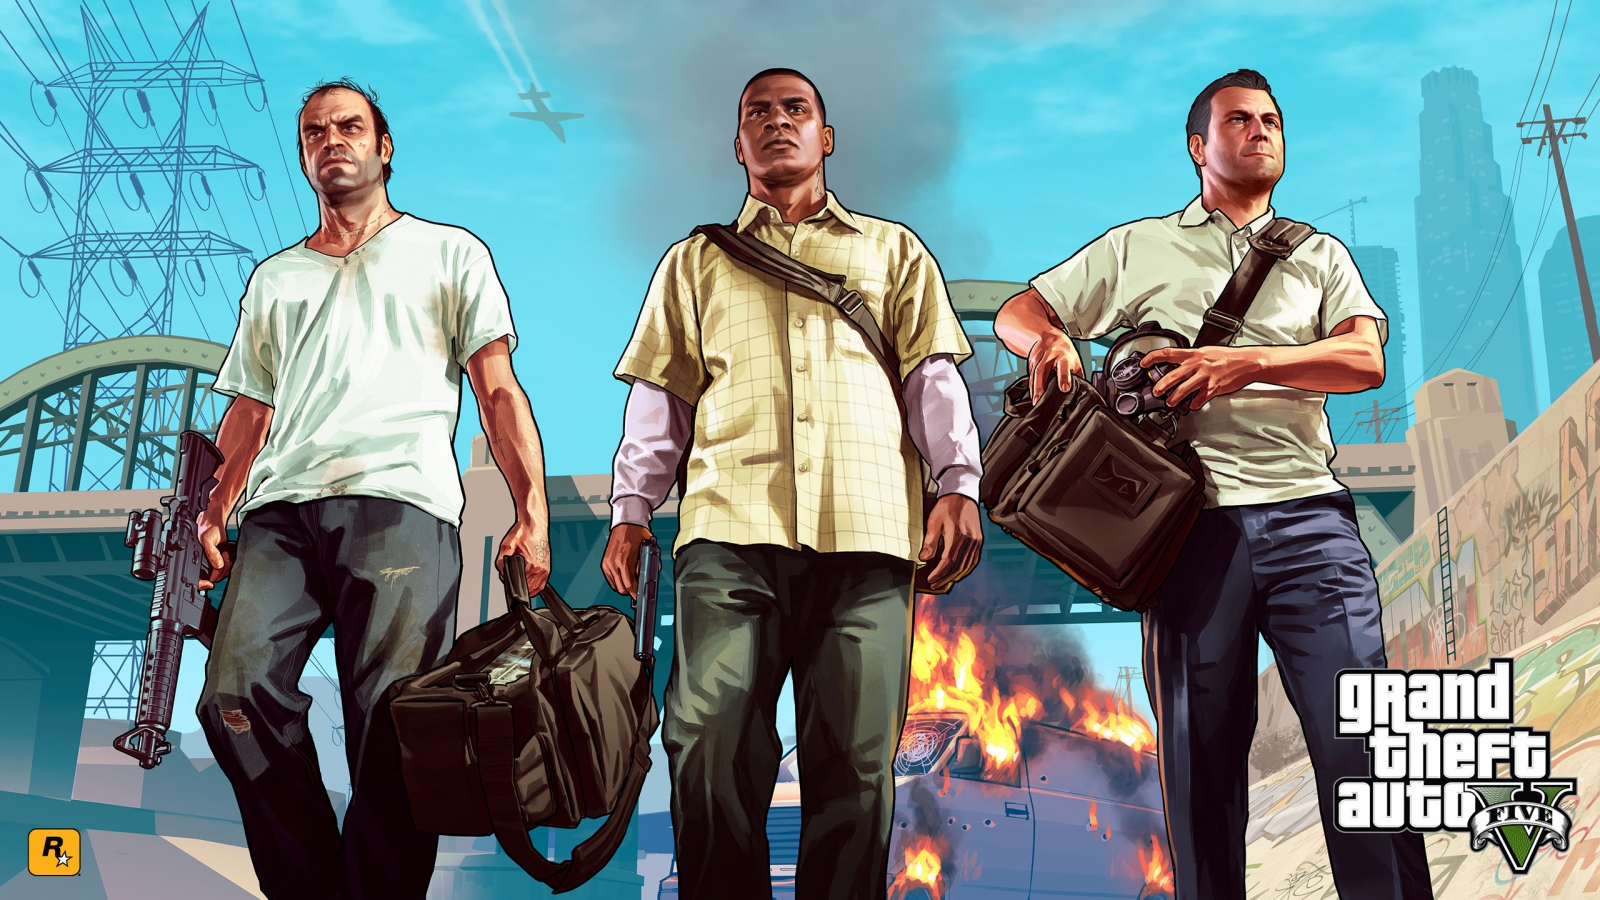 Gta 5 Main Characters for 1600 x 900 HDTV resolution